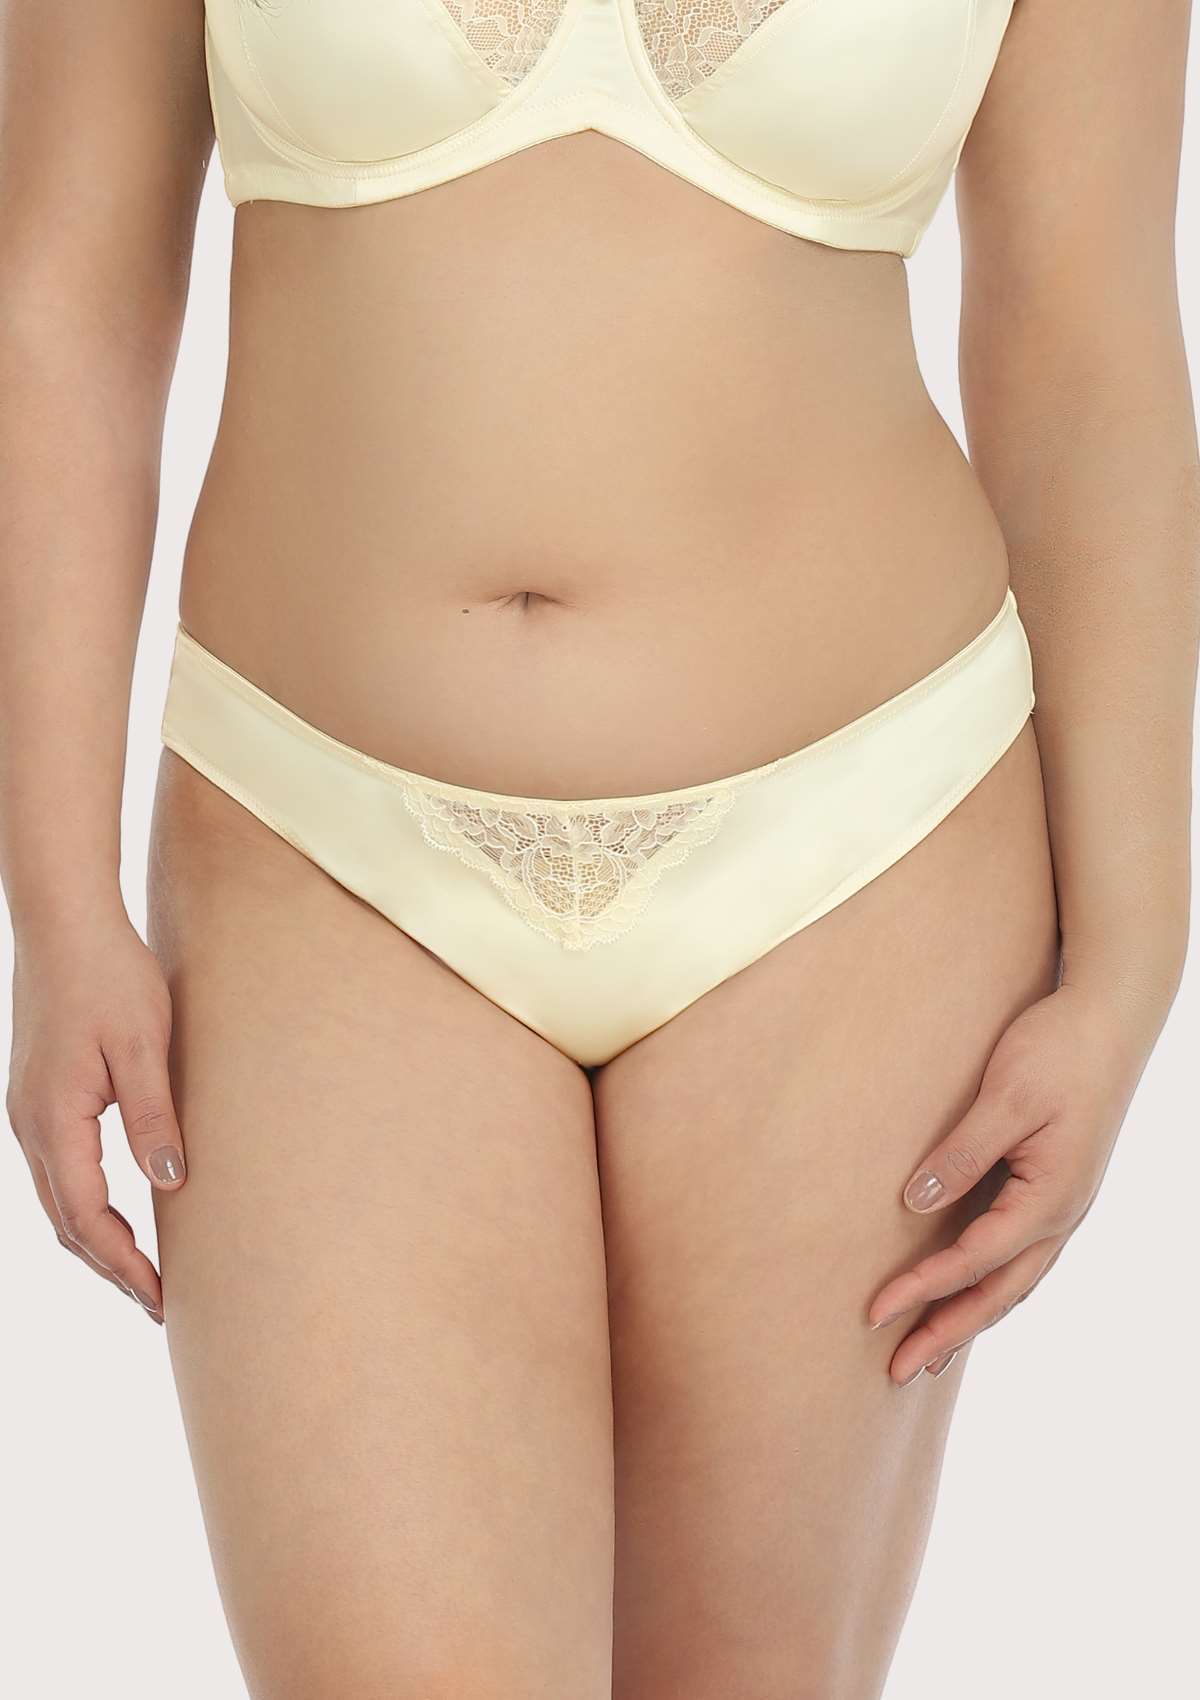 HSIA Foxy Satin Floral Lace Airy Comfy Low Rise Sexy Cute Underwear. - L / Champagne